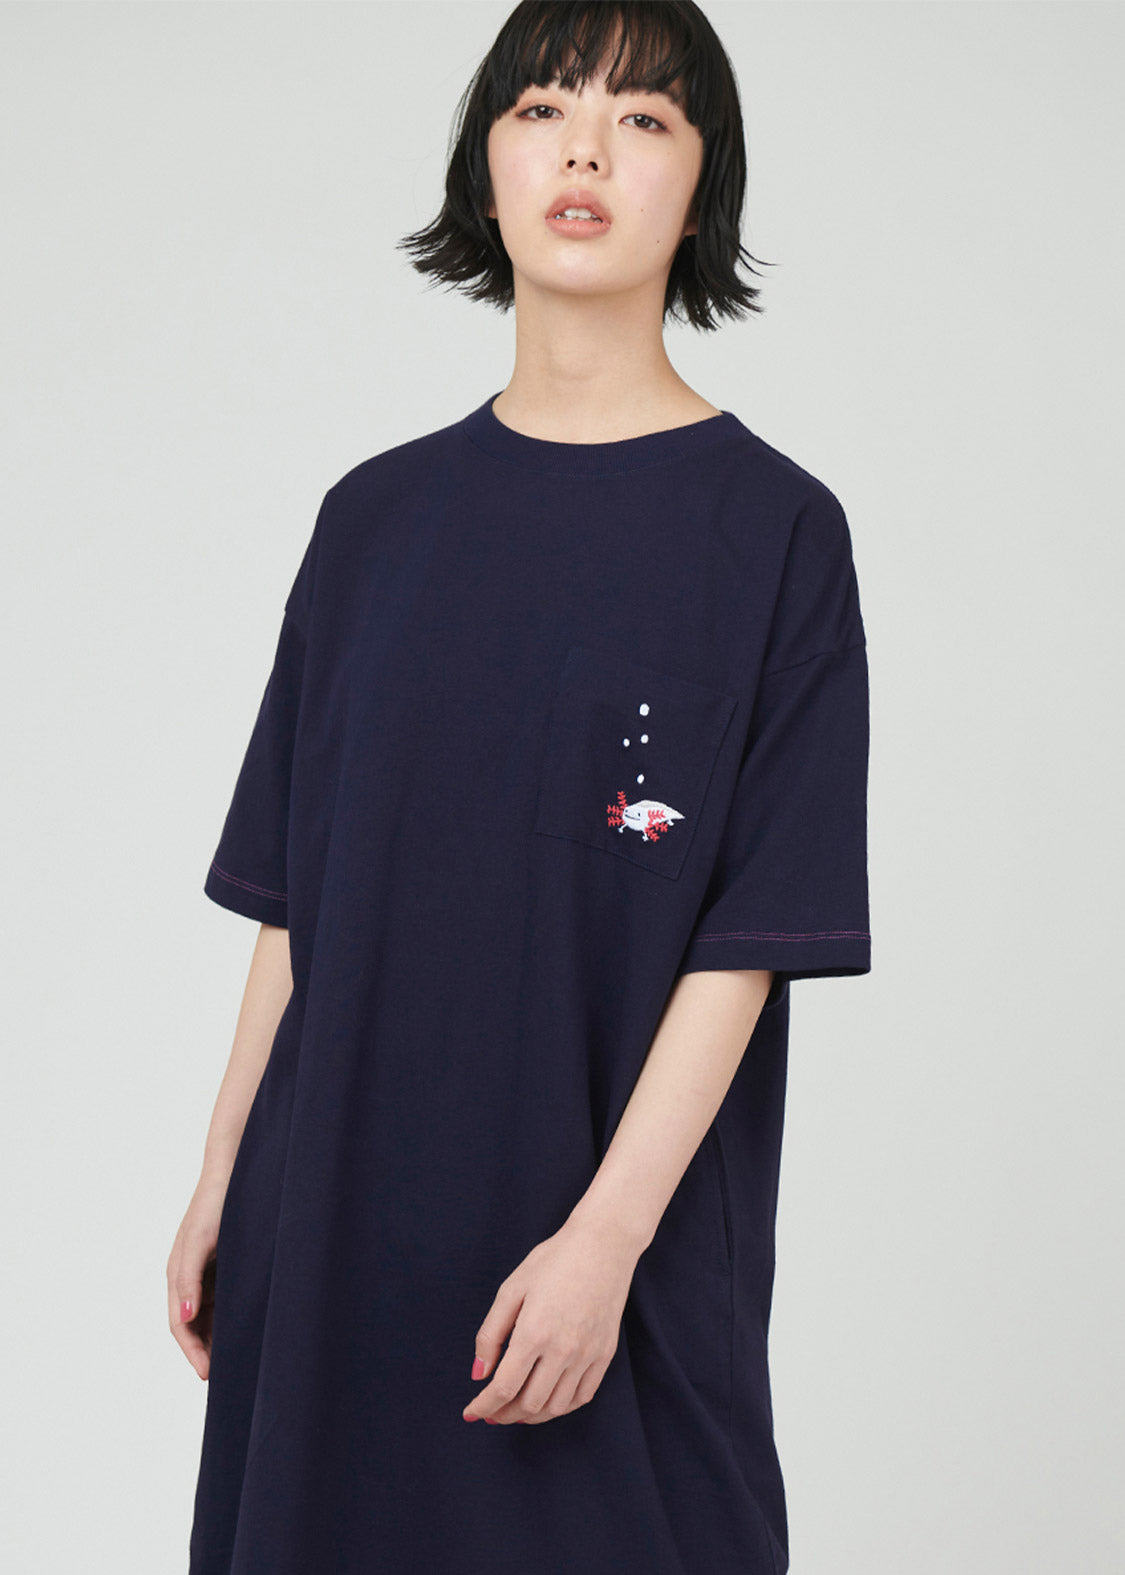 Maxi Tee Short Sleeve One-piece (Smiling Wooper)